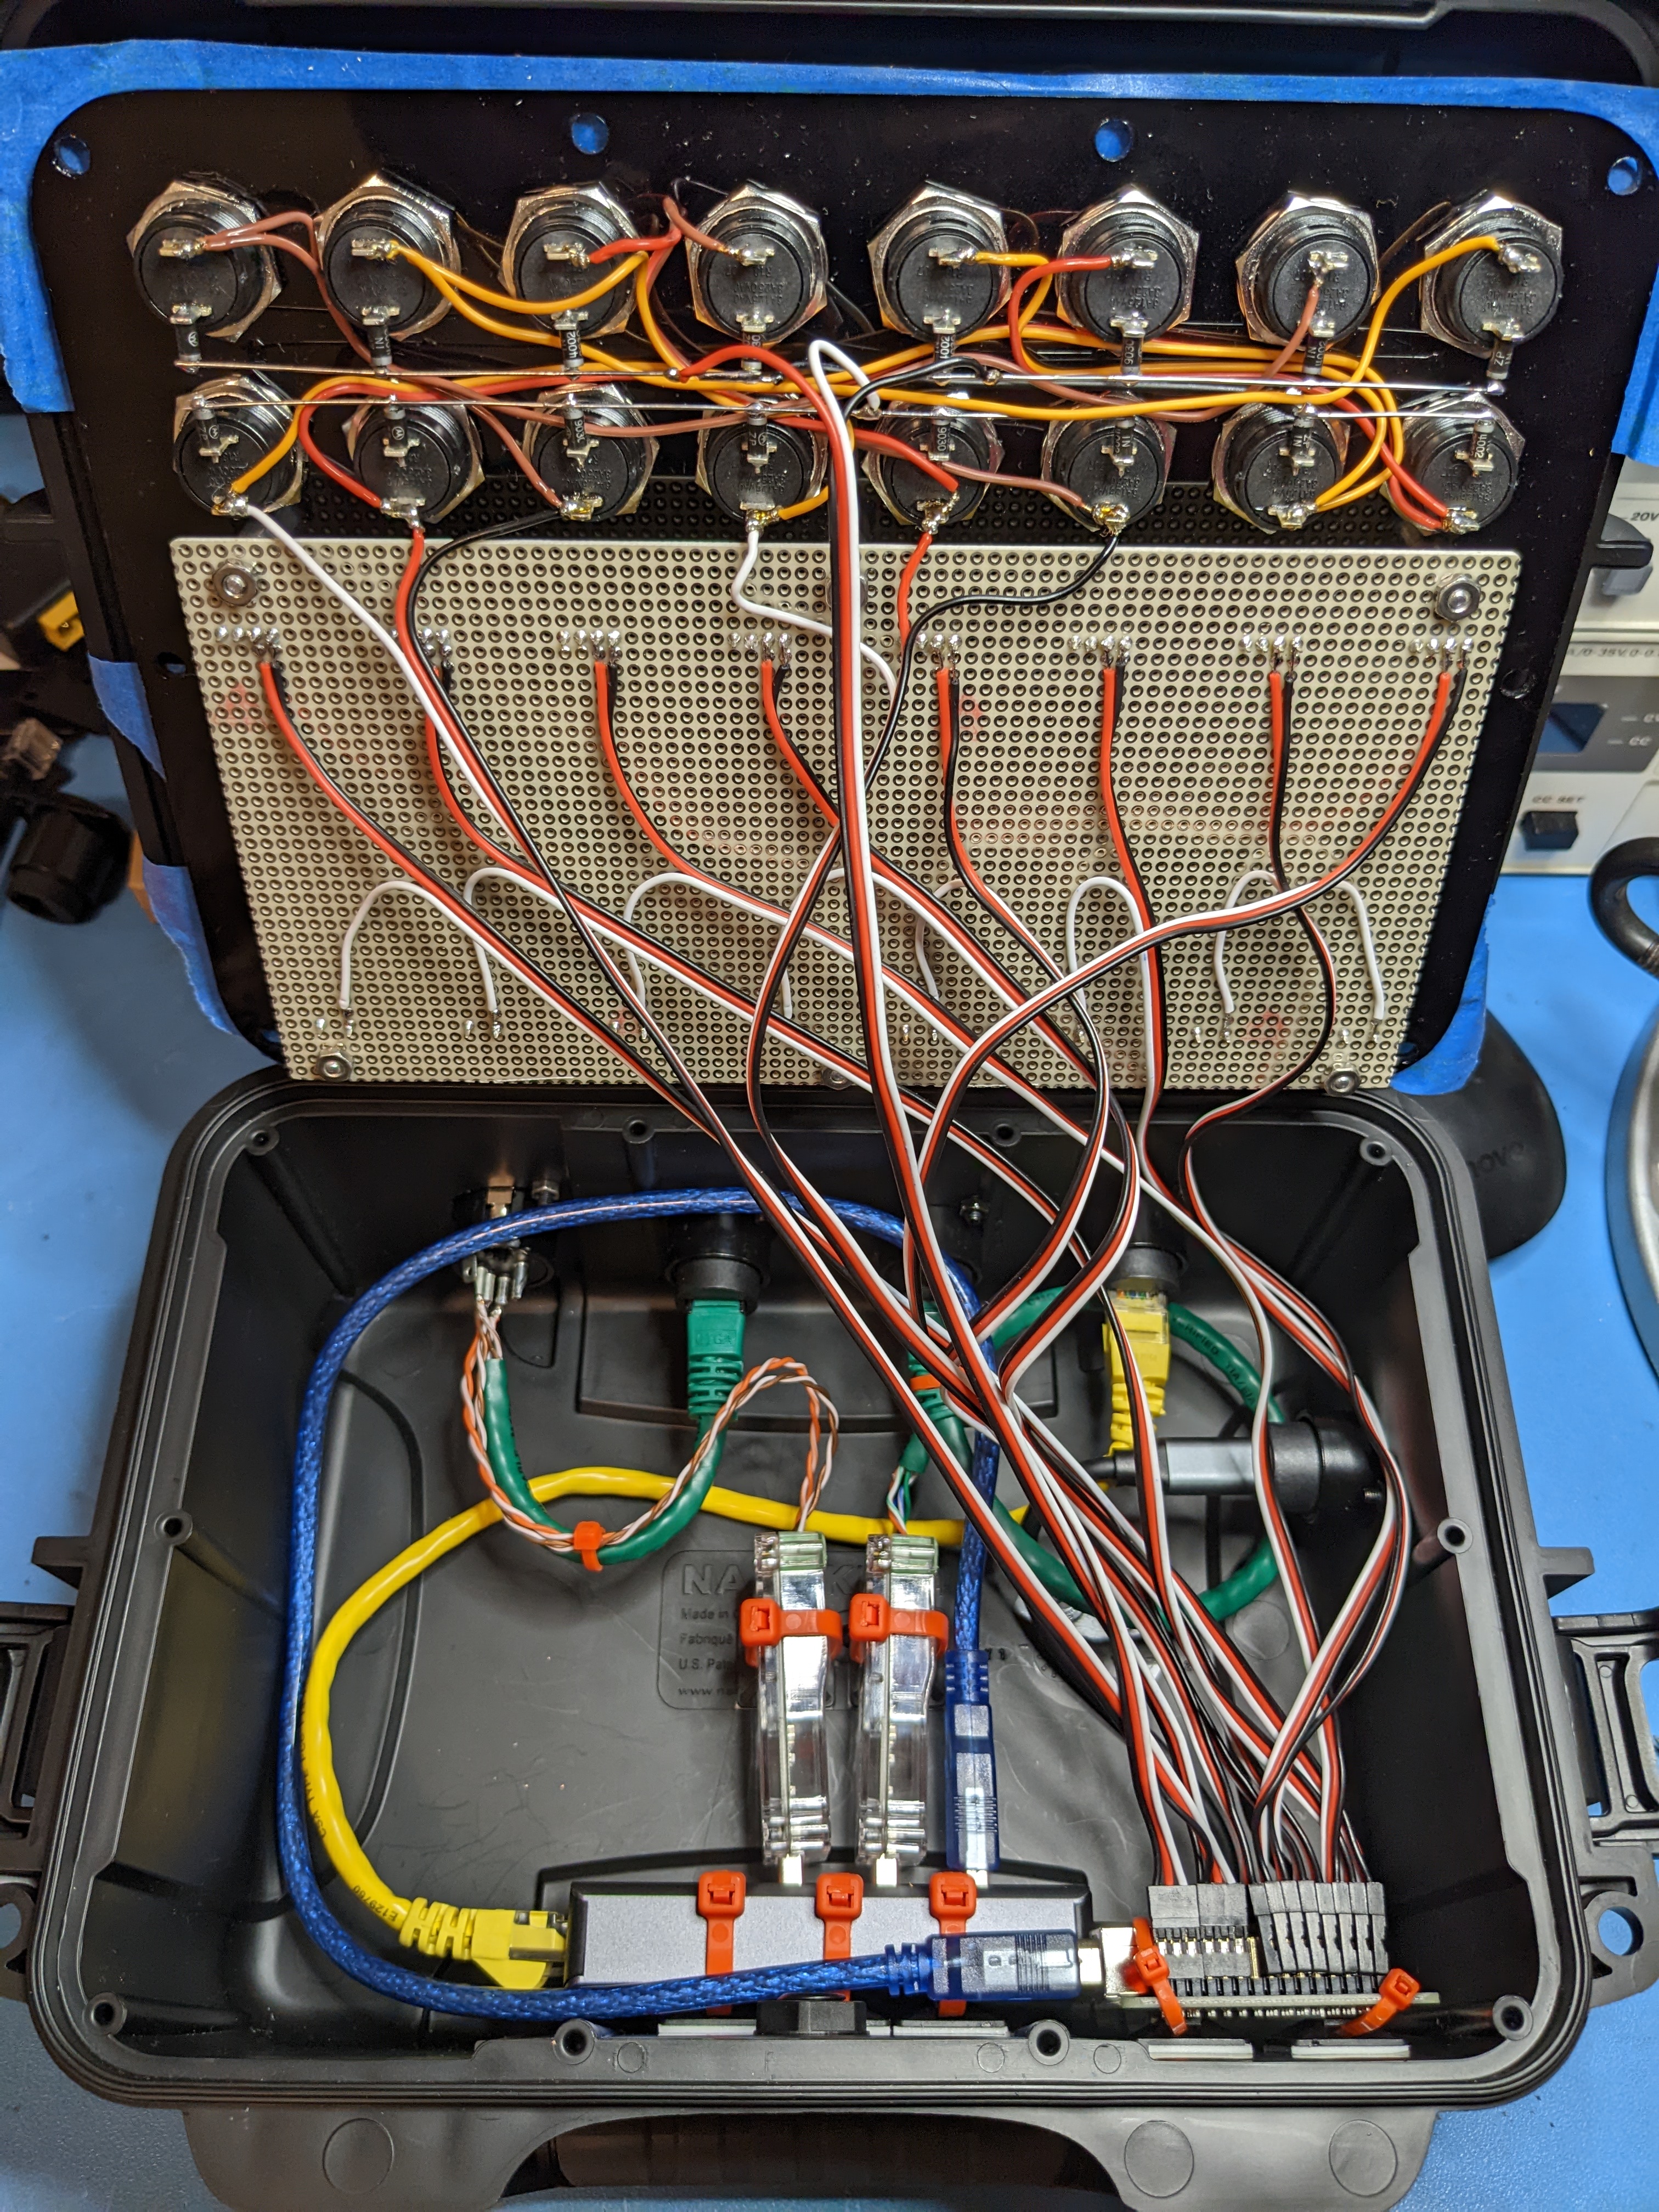 Photo of GSE internals showing USB hub, serial adapters, and other misc internal wiring